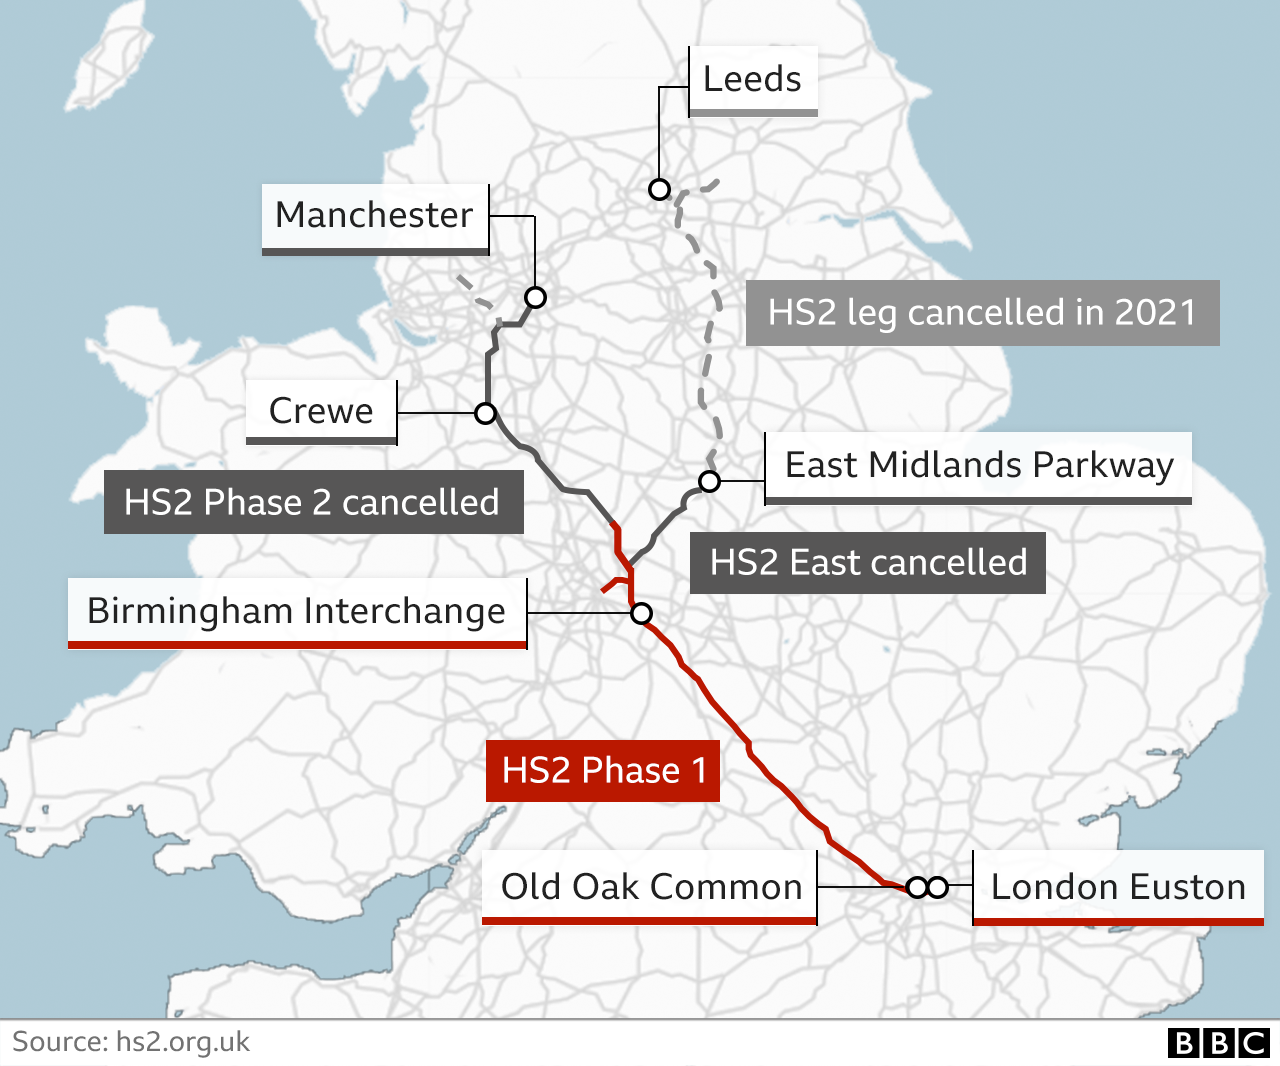 Map of HS2 showing current plans and cancelled routes across England.